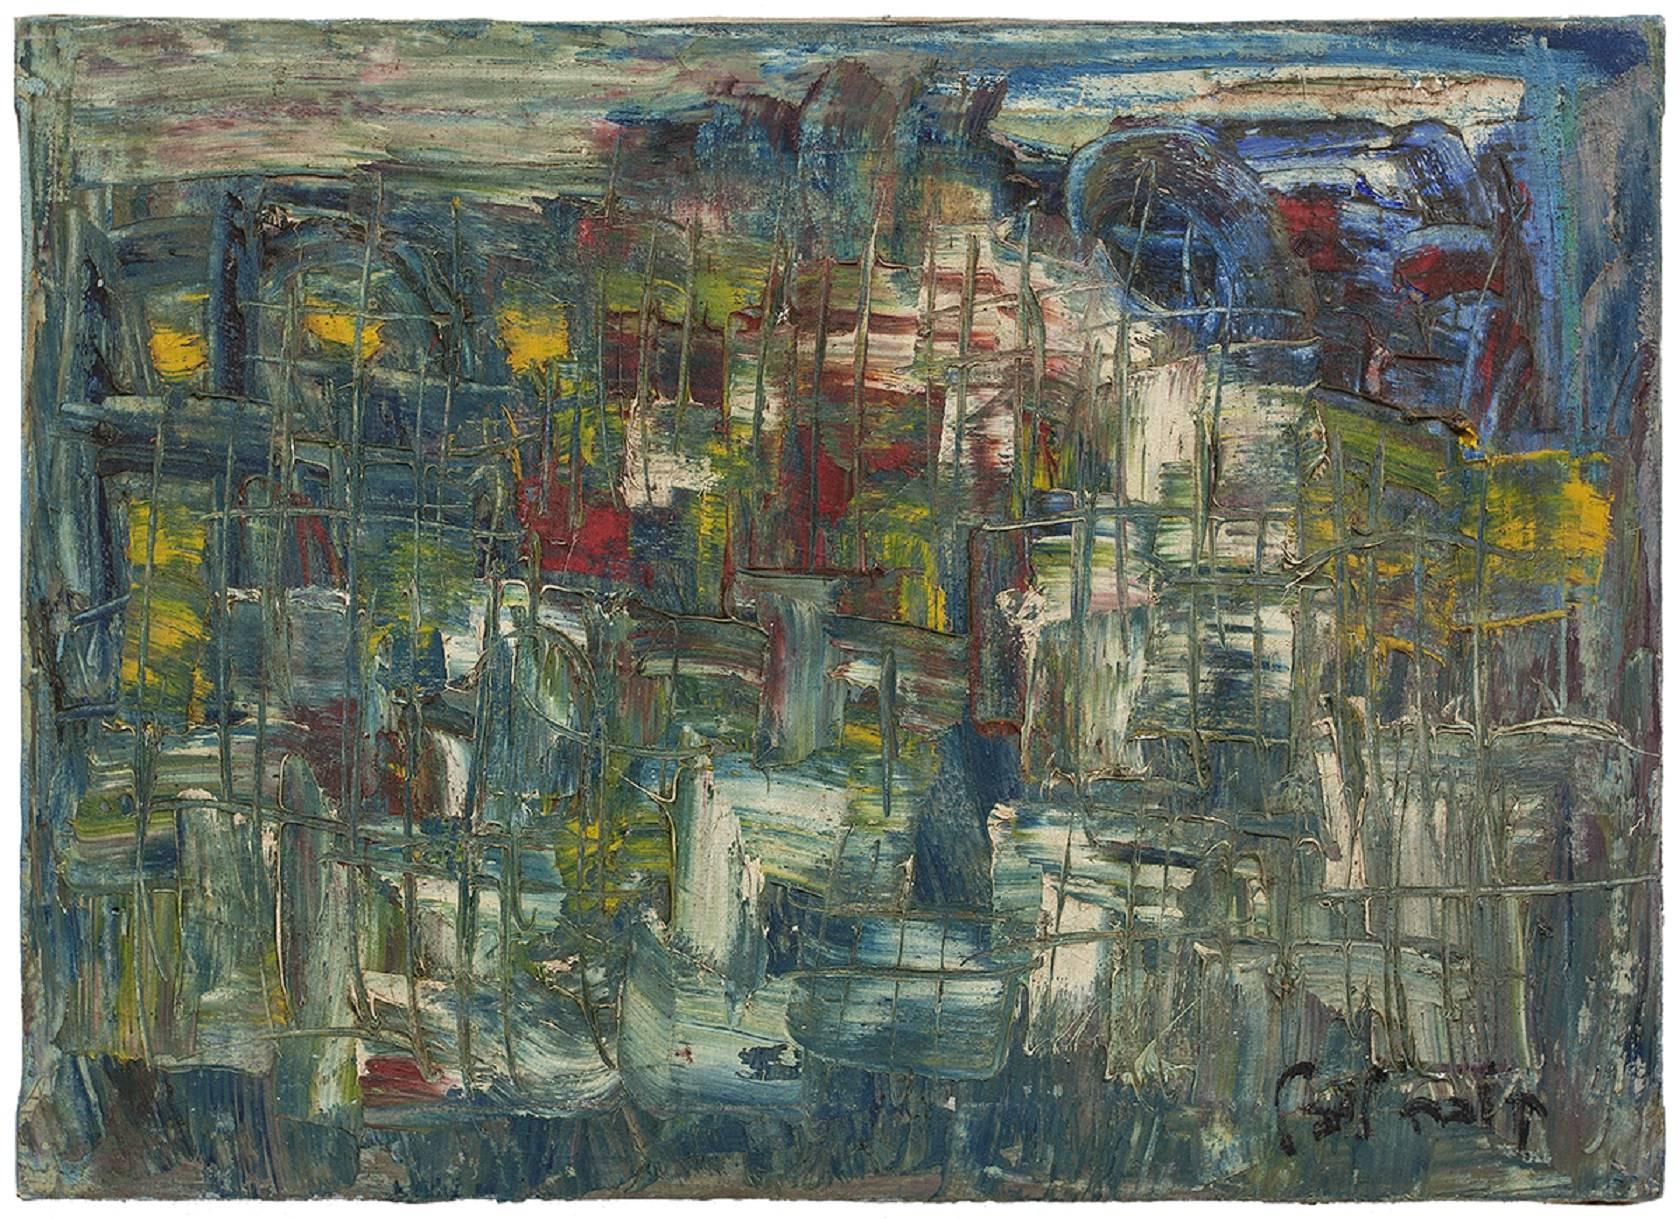 UNTITLED (ABSTRACT BLUE CITYSCAPE) - Painting by Yaakov Loebel